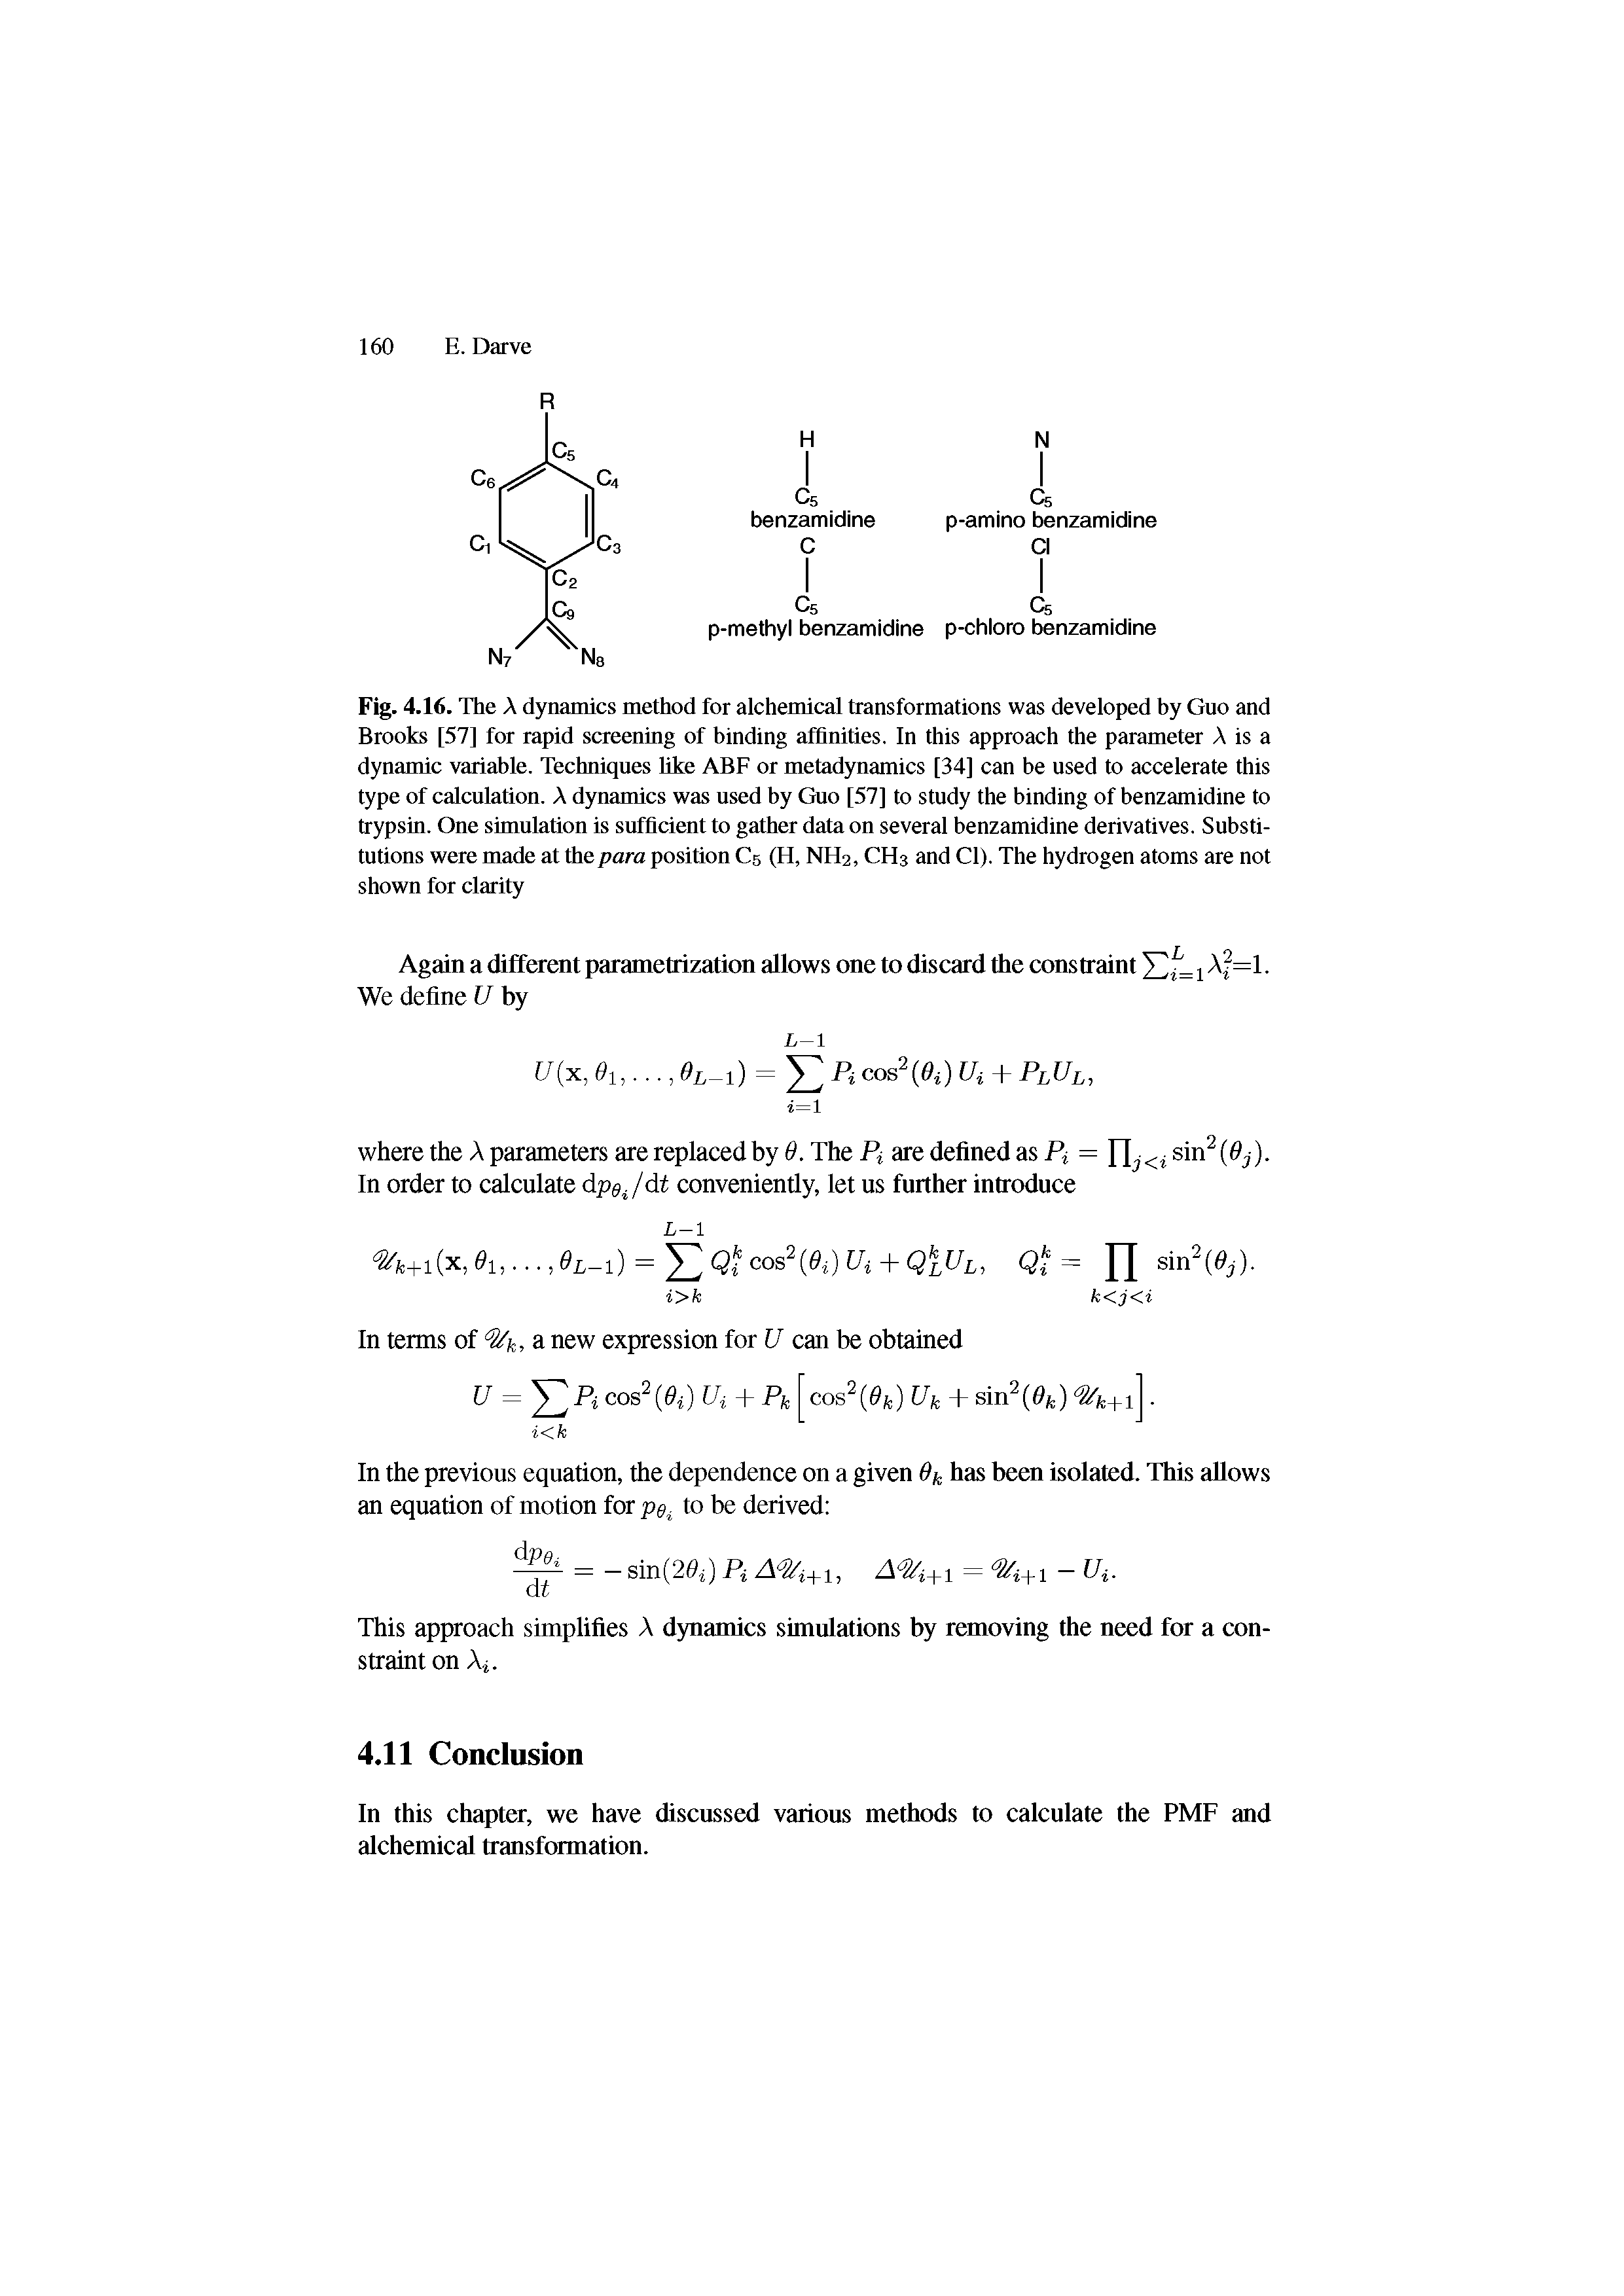 Fig. 4.16. The A dynamics method for alchemical transformations was developed by Guo and Brooks [57] for rapid screening of binding affinities. In this approach the parameter A is a dynamic variable. Techniques like ABF or metadynamics [34] can be used to accelerate this type of calculation. A dynamics was used by Guo [57] to study the binding of benzamidine to trypsin. One simulation is sufficient to gather data on several benzamidine derivatives. Substitutions were made at the para position C5 (H, NH2, CH3 and Cl). The hydrogen atoms are not shown for clarity...